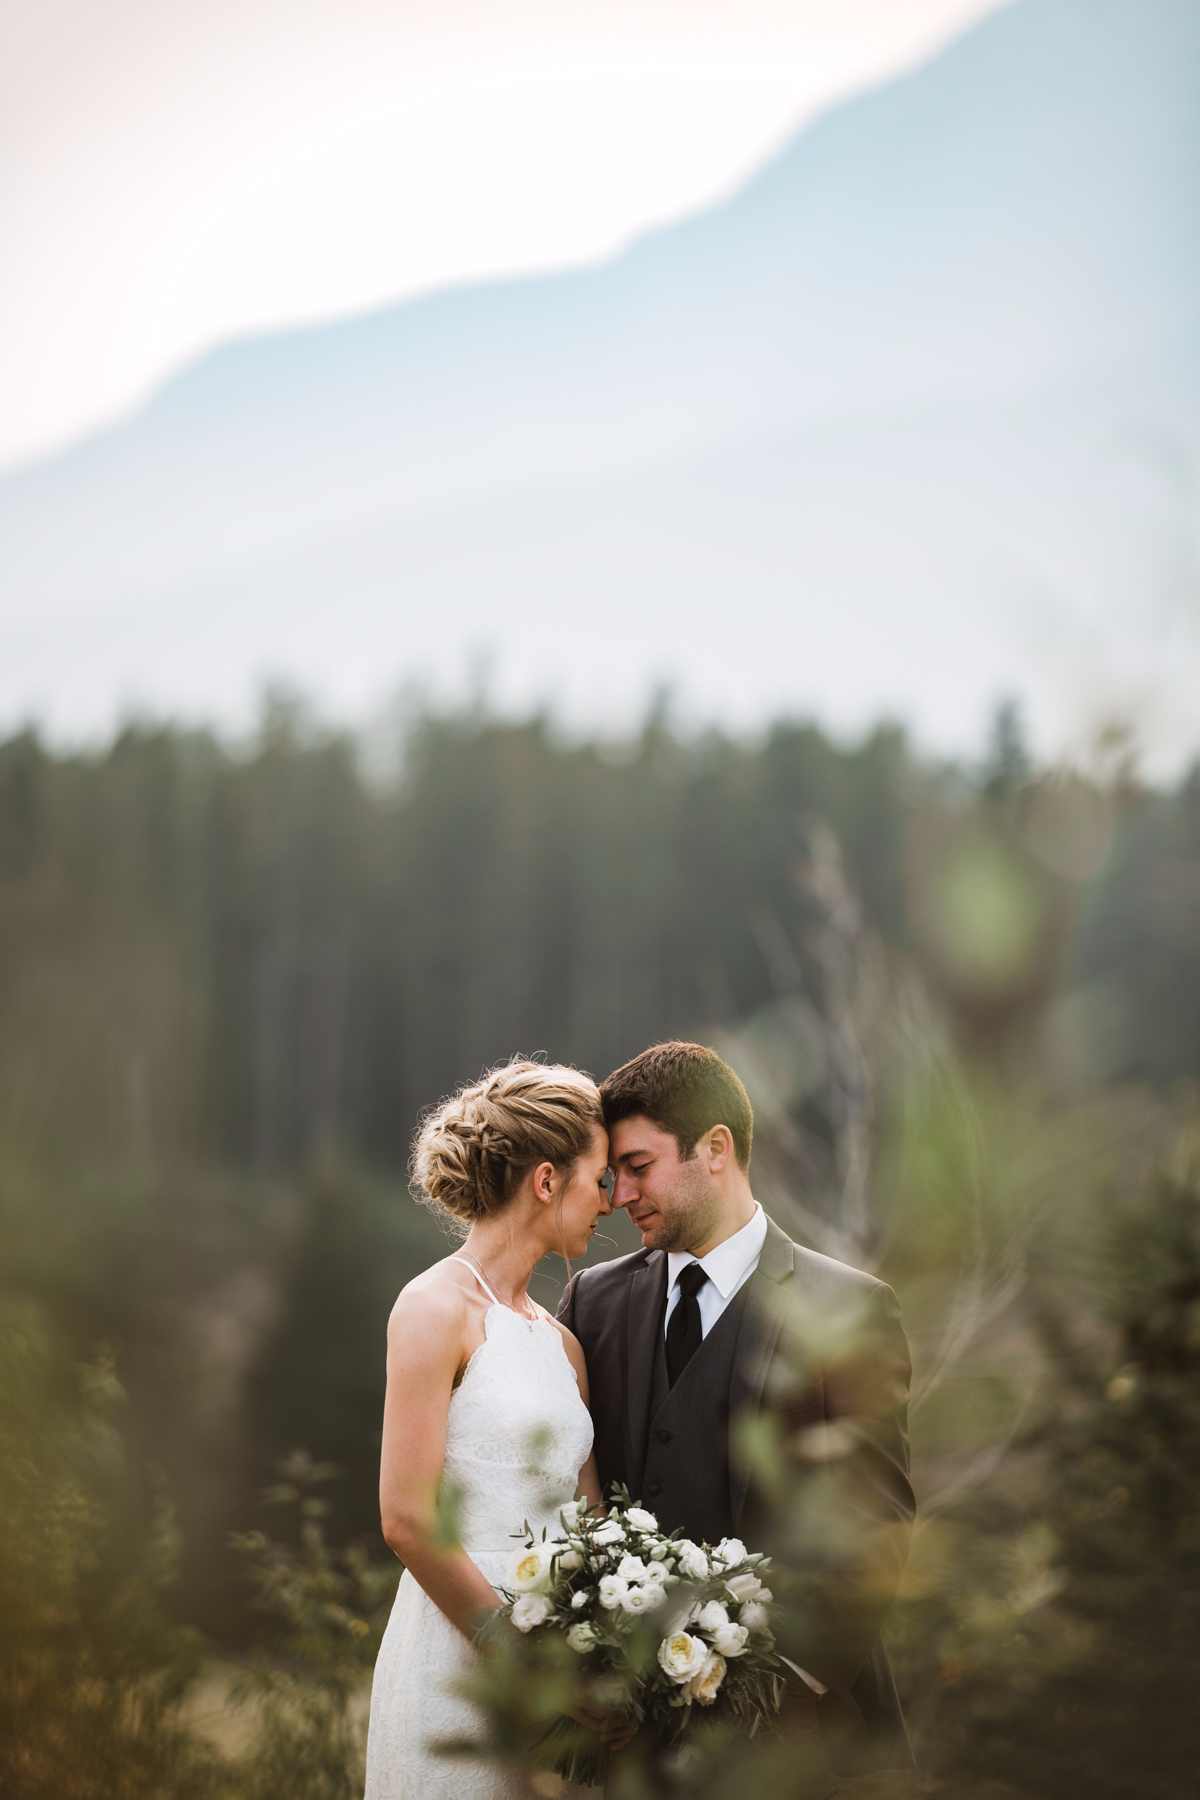 Calgary wedding photographer at Canmore and Banff destination elopement wedding in rocky mountains, Alberta, Canada - Photo 20